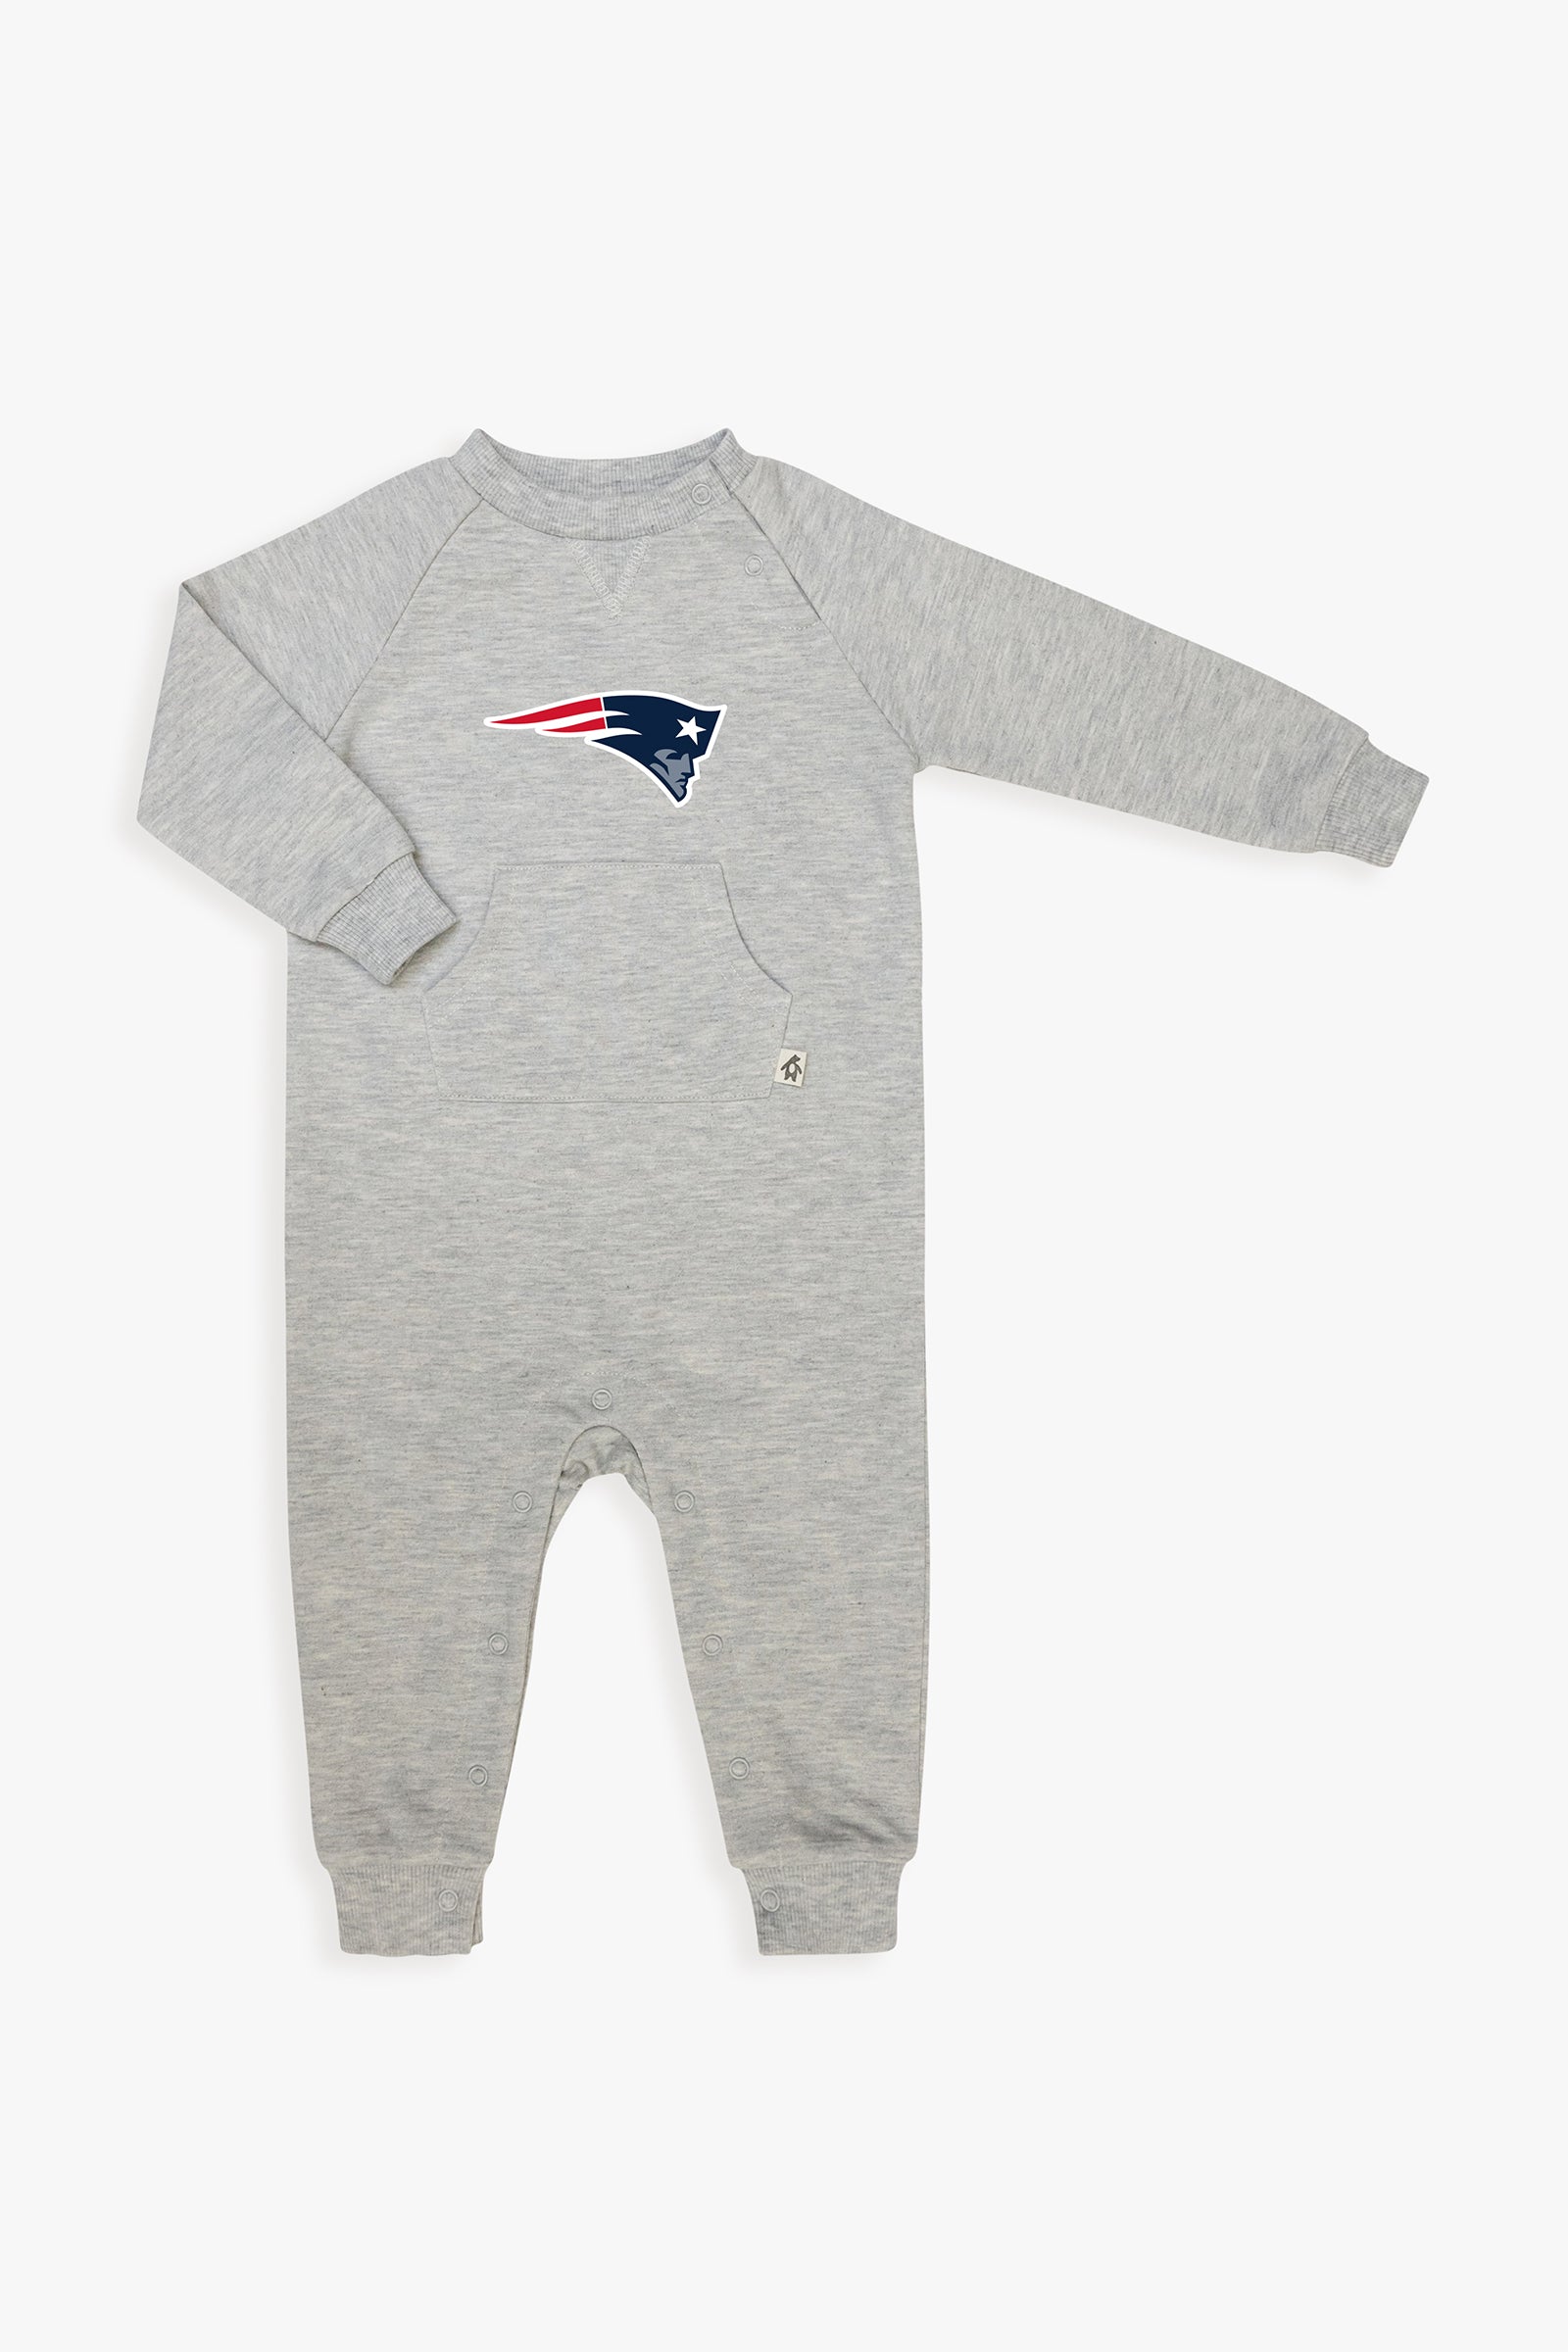 Gertex NFL Toddler French Terry Jumpsuit in Grey